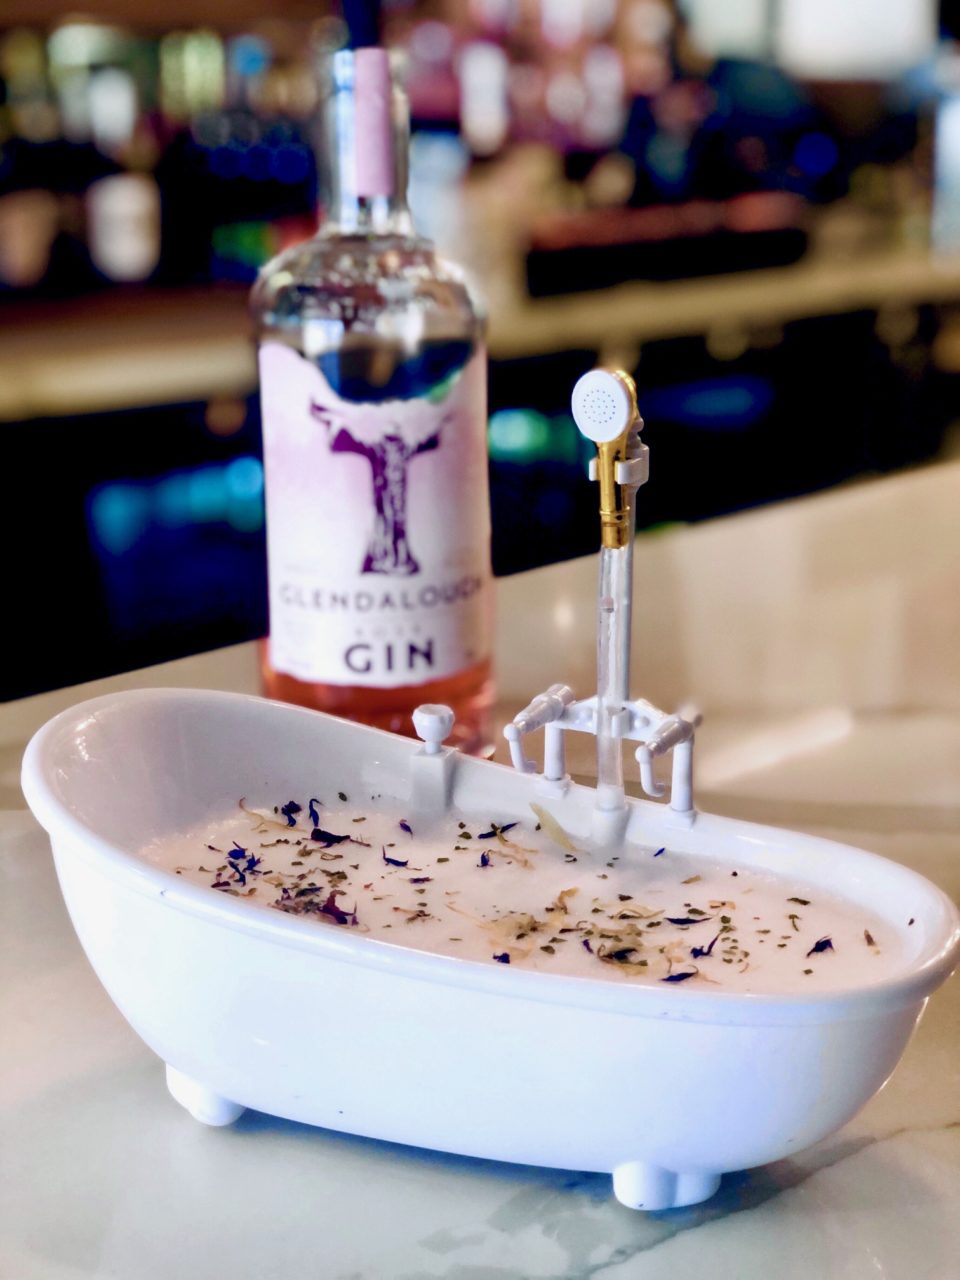 A Rose Gin cocktail served in a Bathtub vessel with edible flowers.